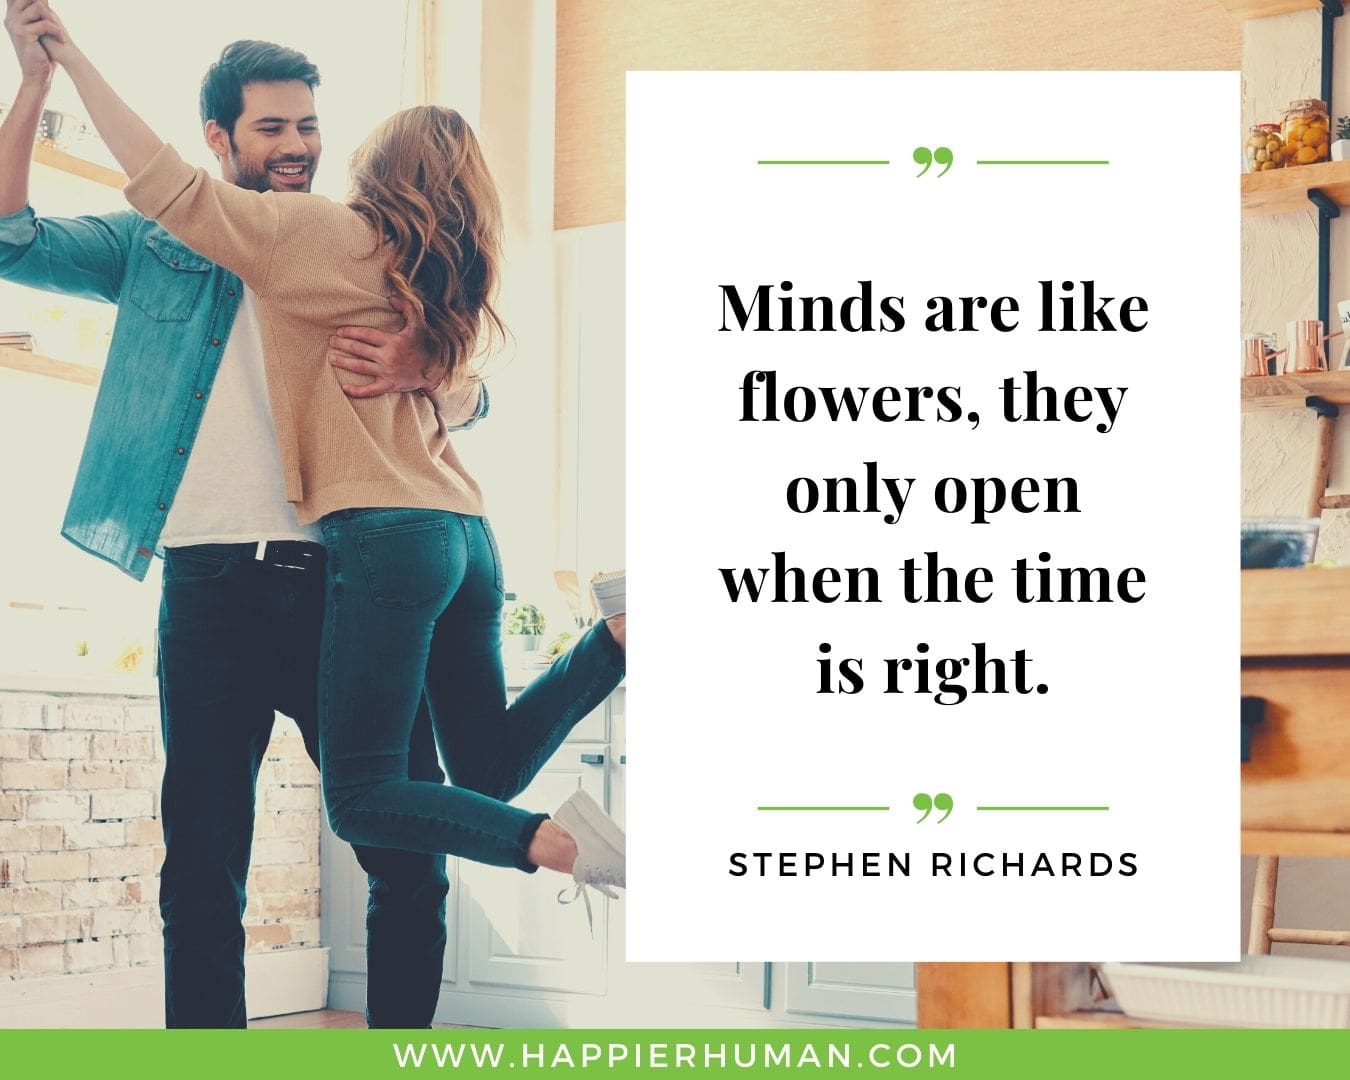 Positive Energy Quotes - “Minds are like flowers, they only open when the time is right.” - Stephen Richards